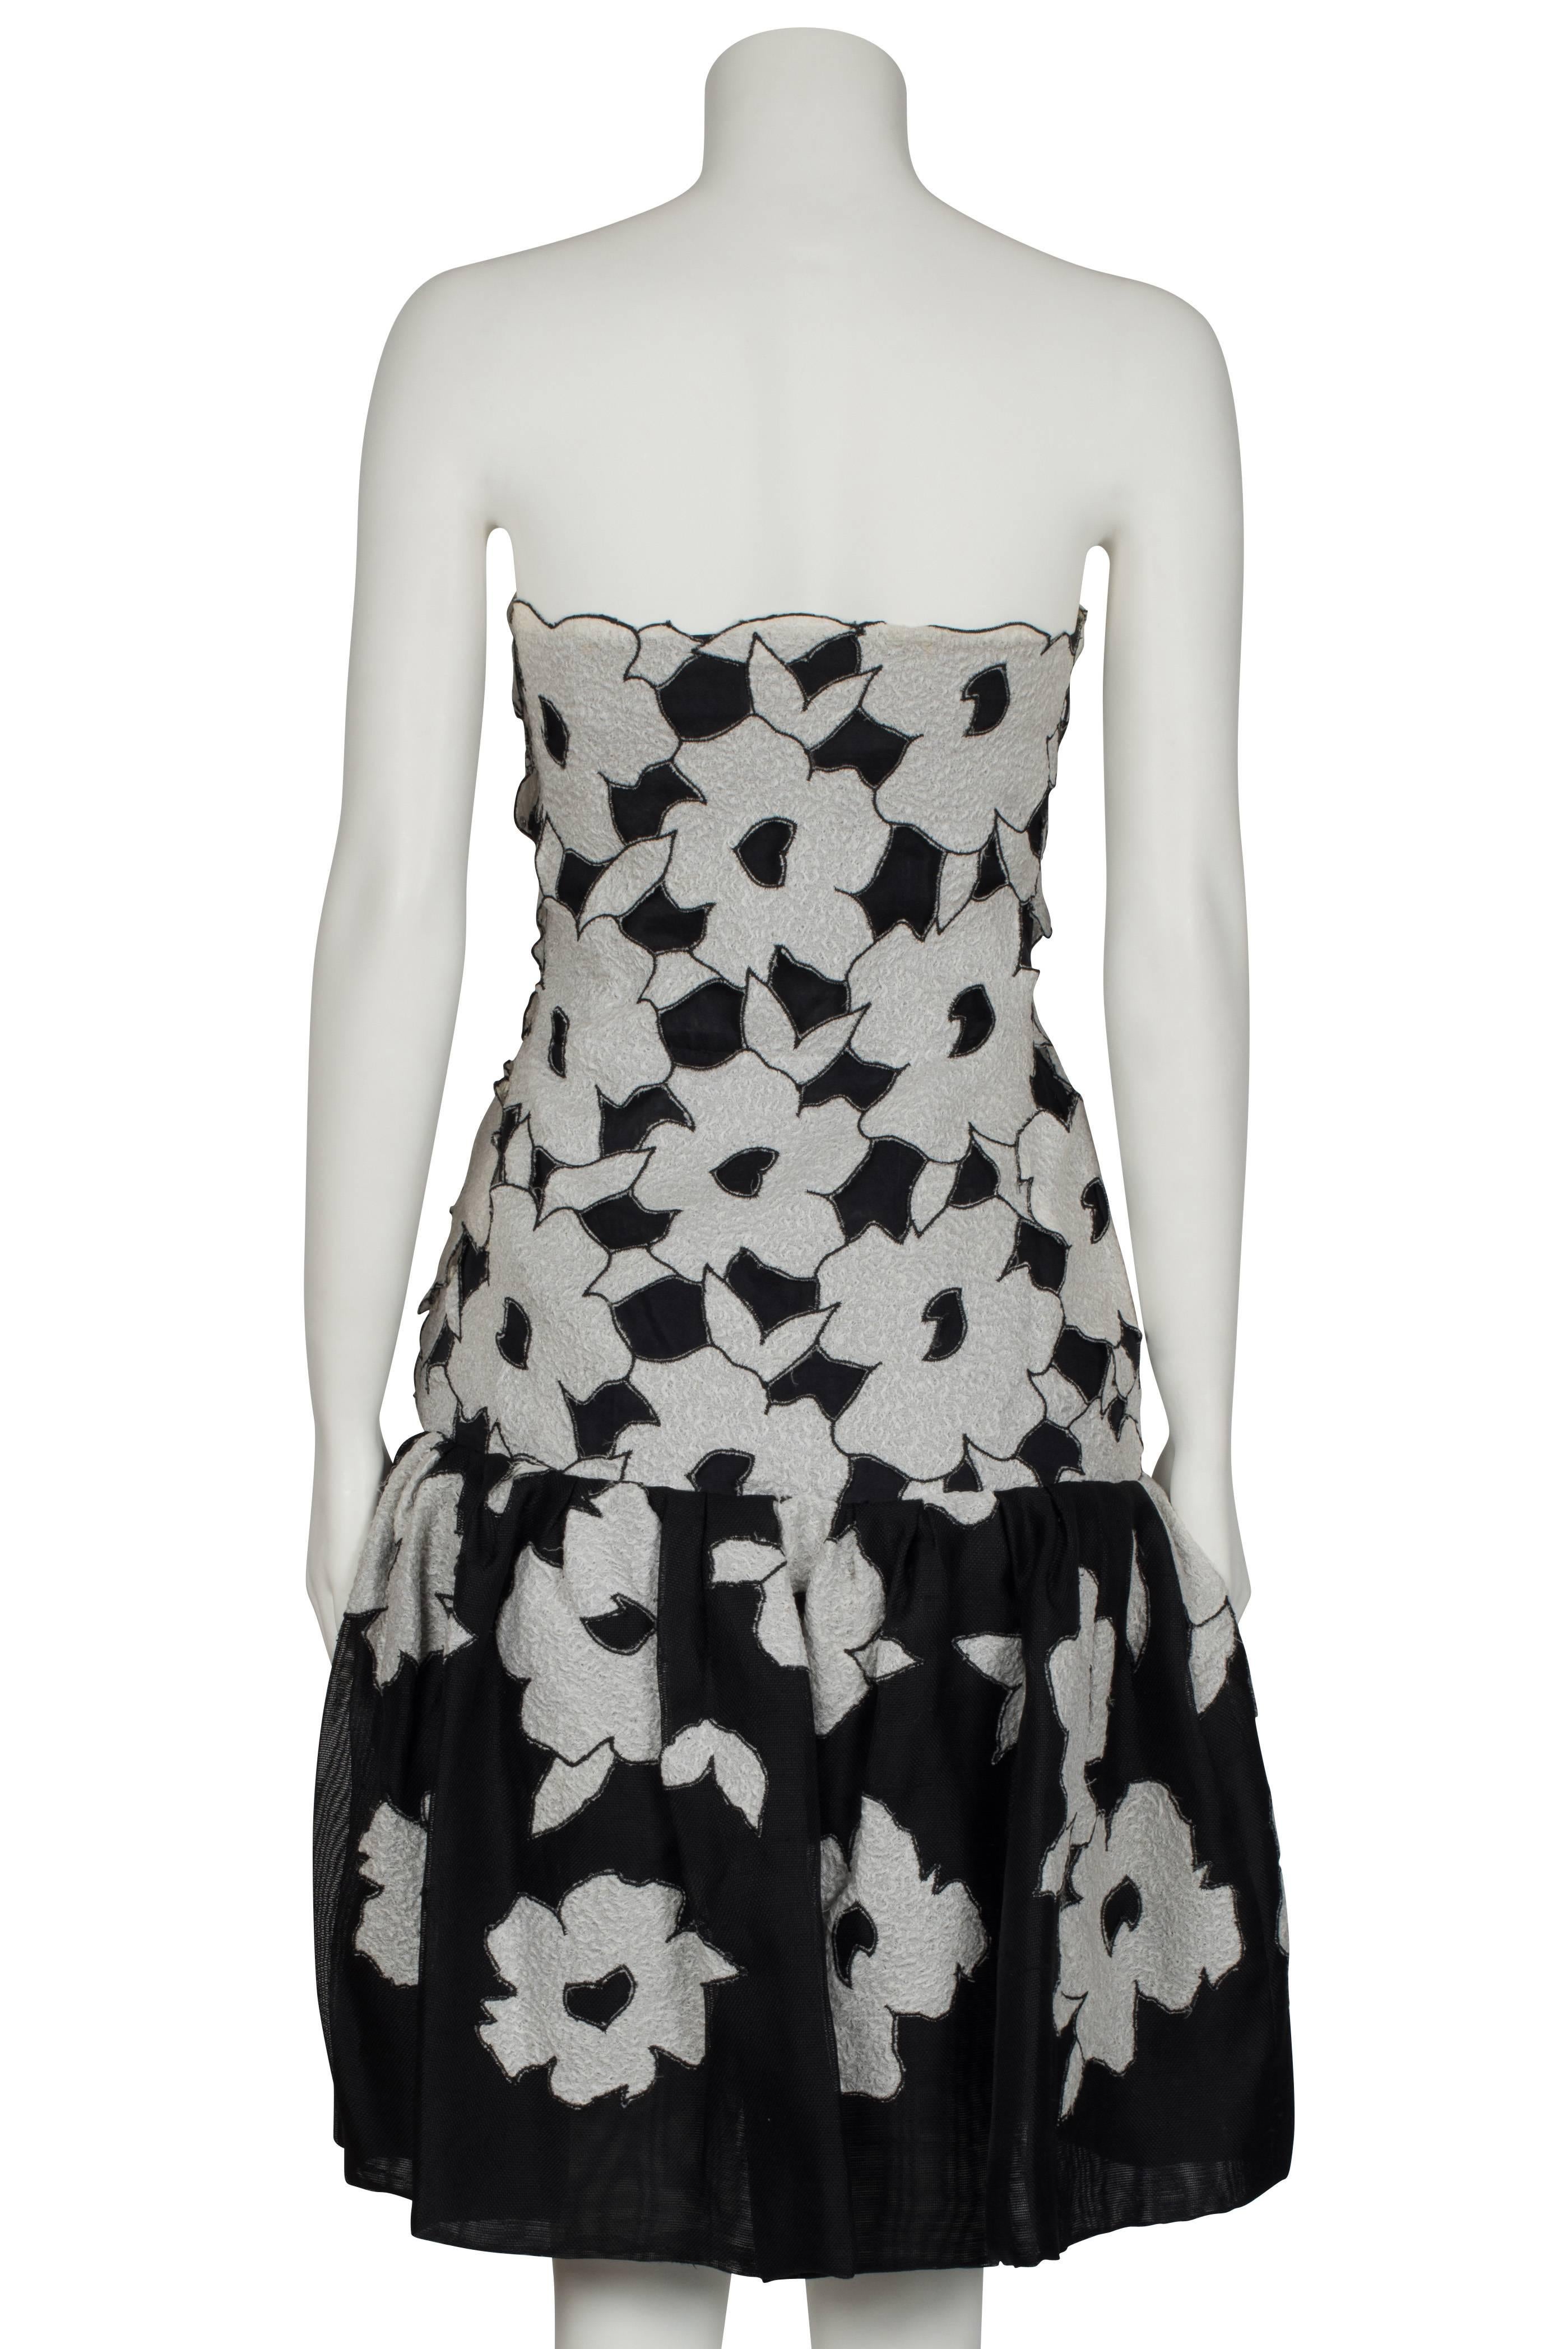 Gray Christian Dior Couture Monochrome Floral Bandeau Dress Spring/Summer 1983 For Sale